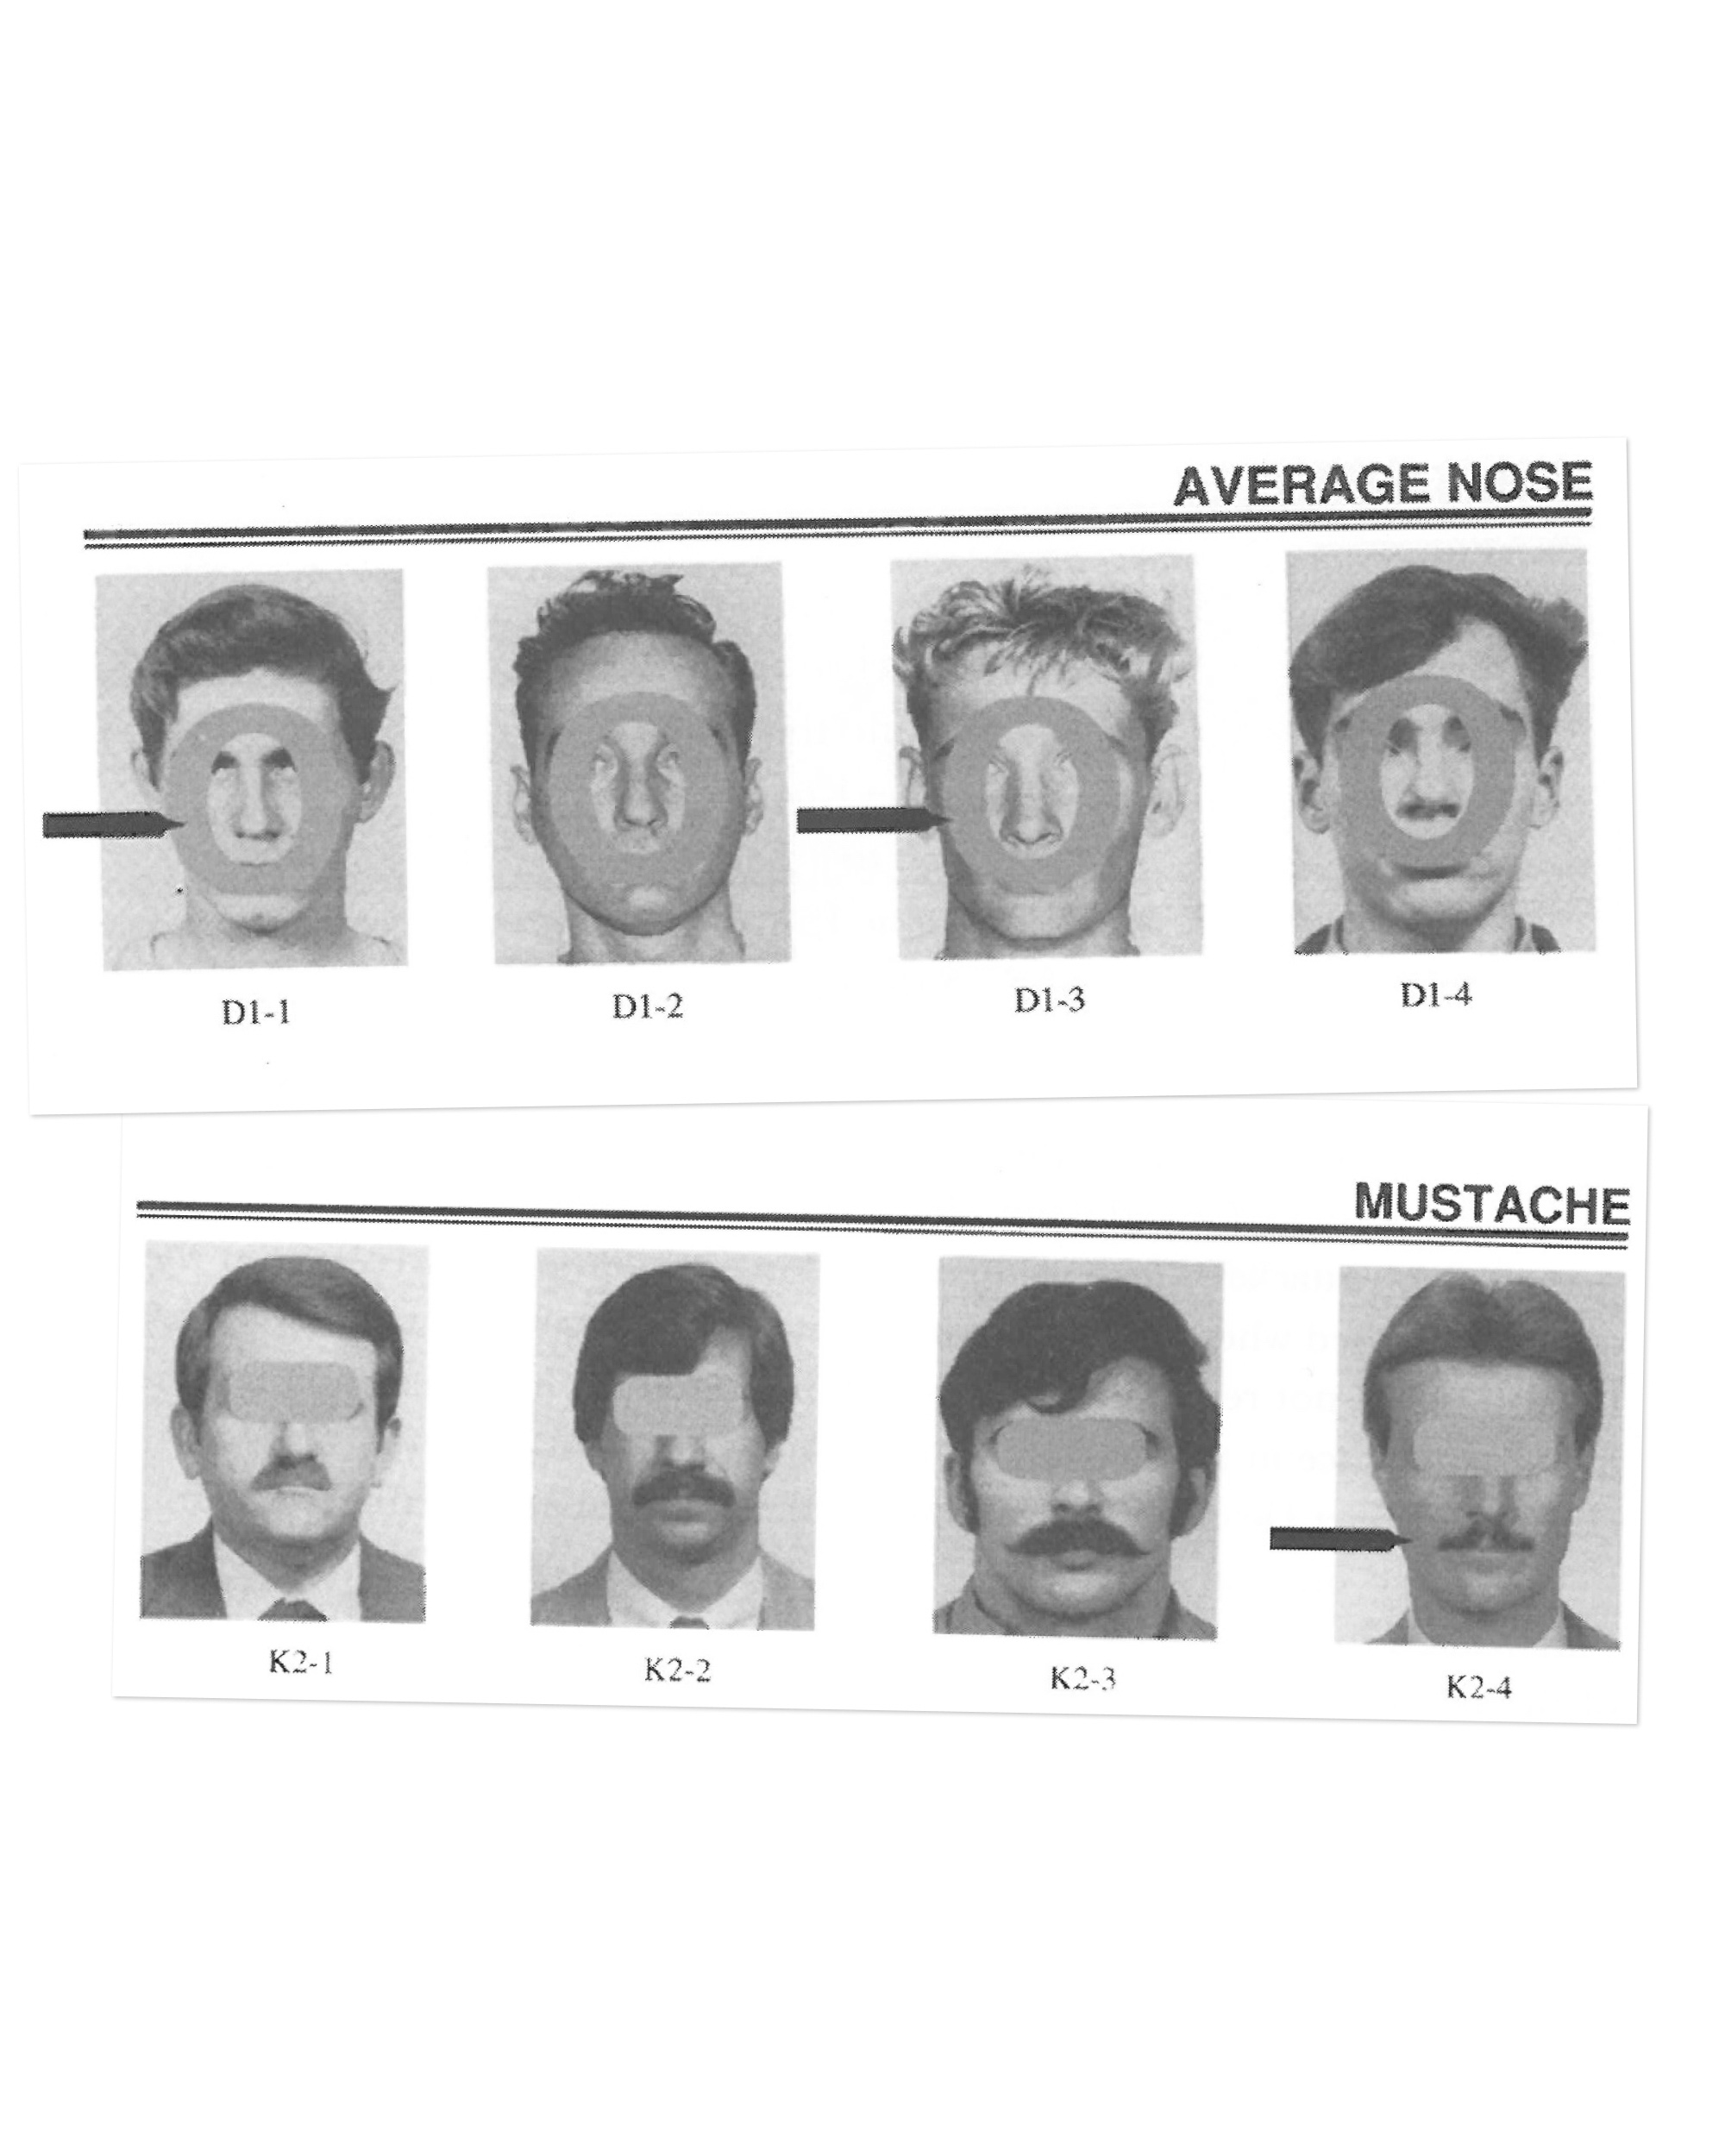 An excerpt from the FBI Facial Identification Catalog. Image courtesy of Lois Gibson.